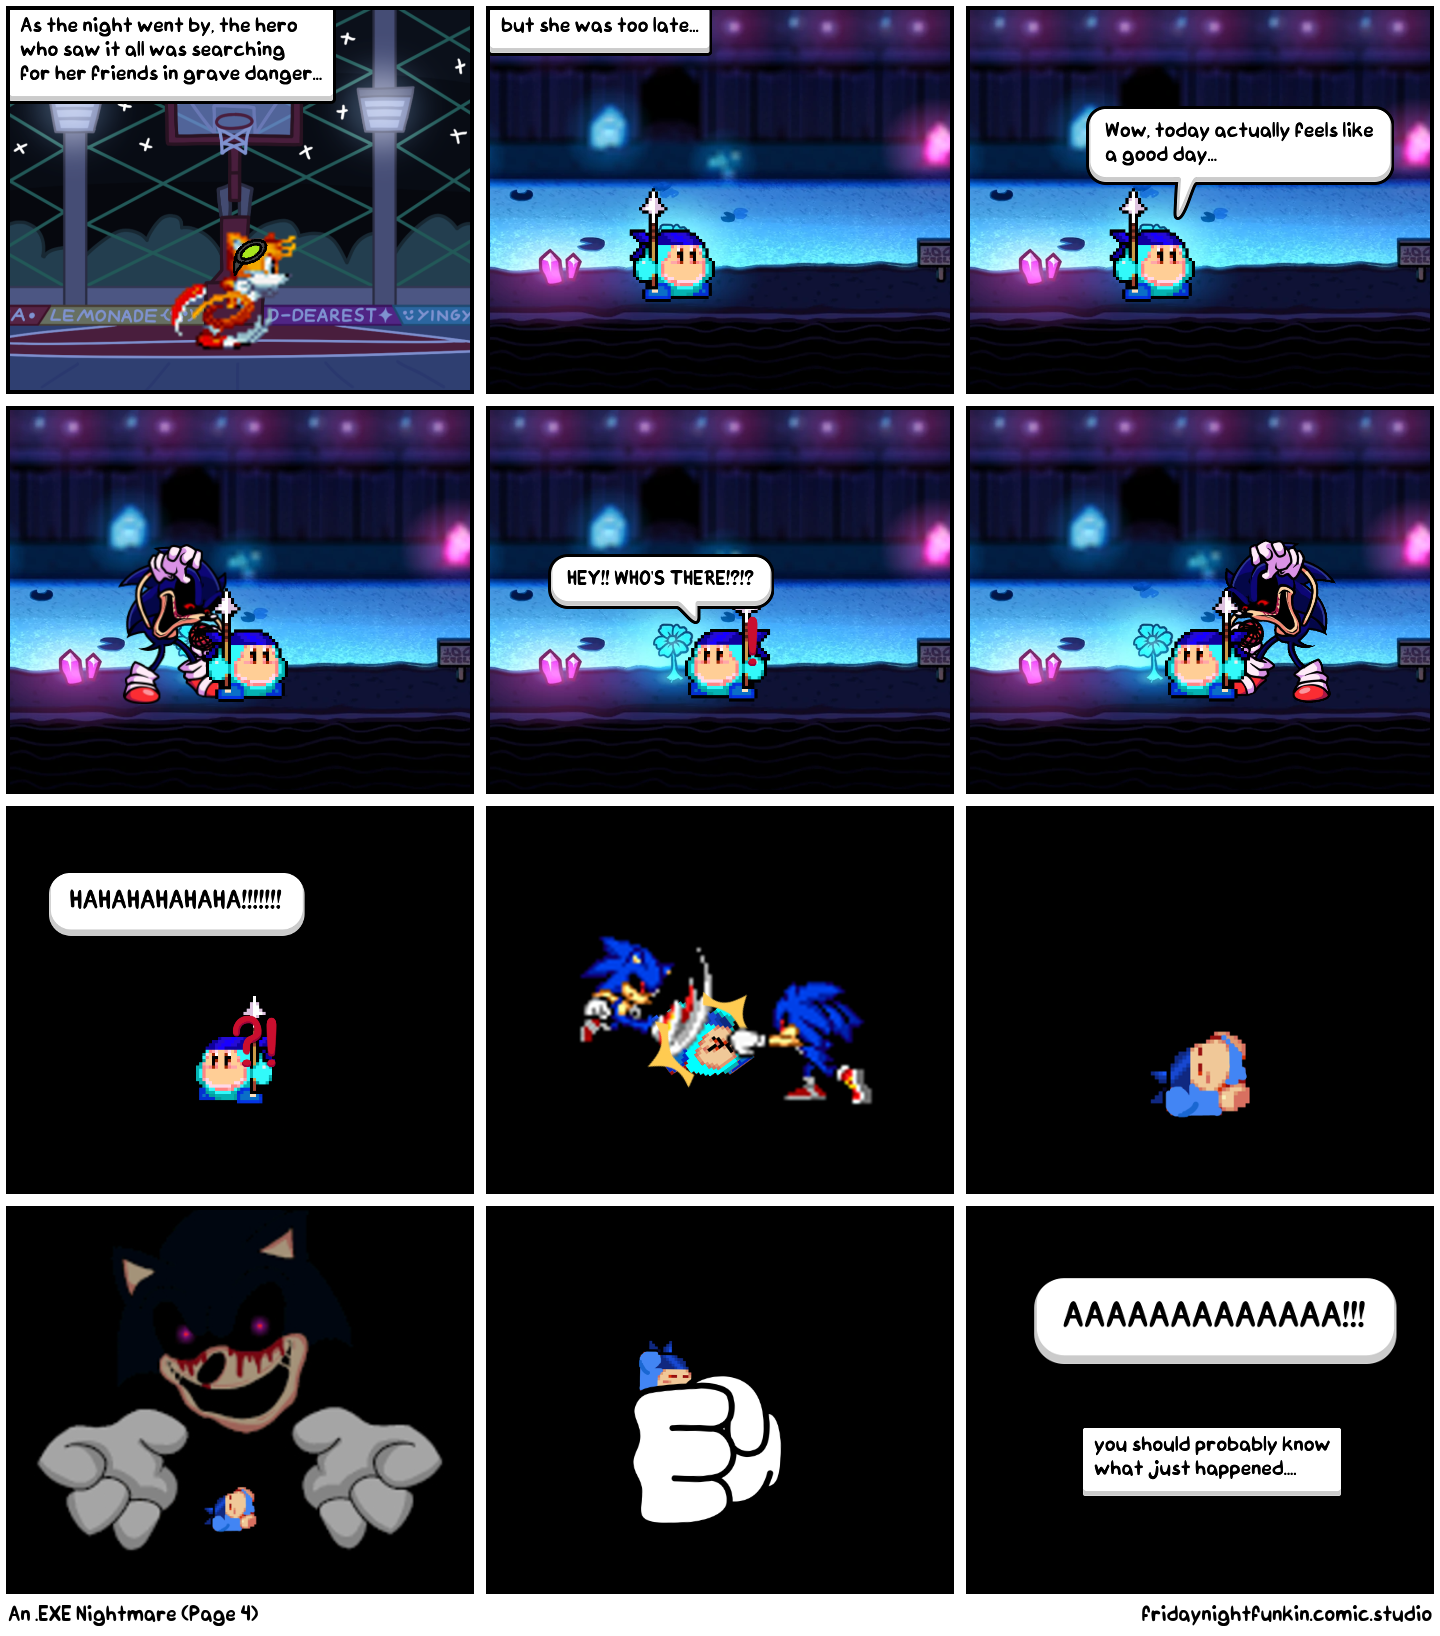 An .EXE Nightmare (Page 4)